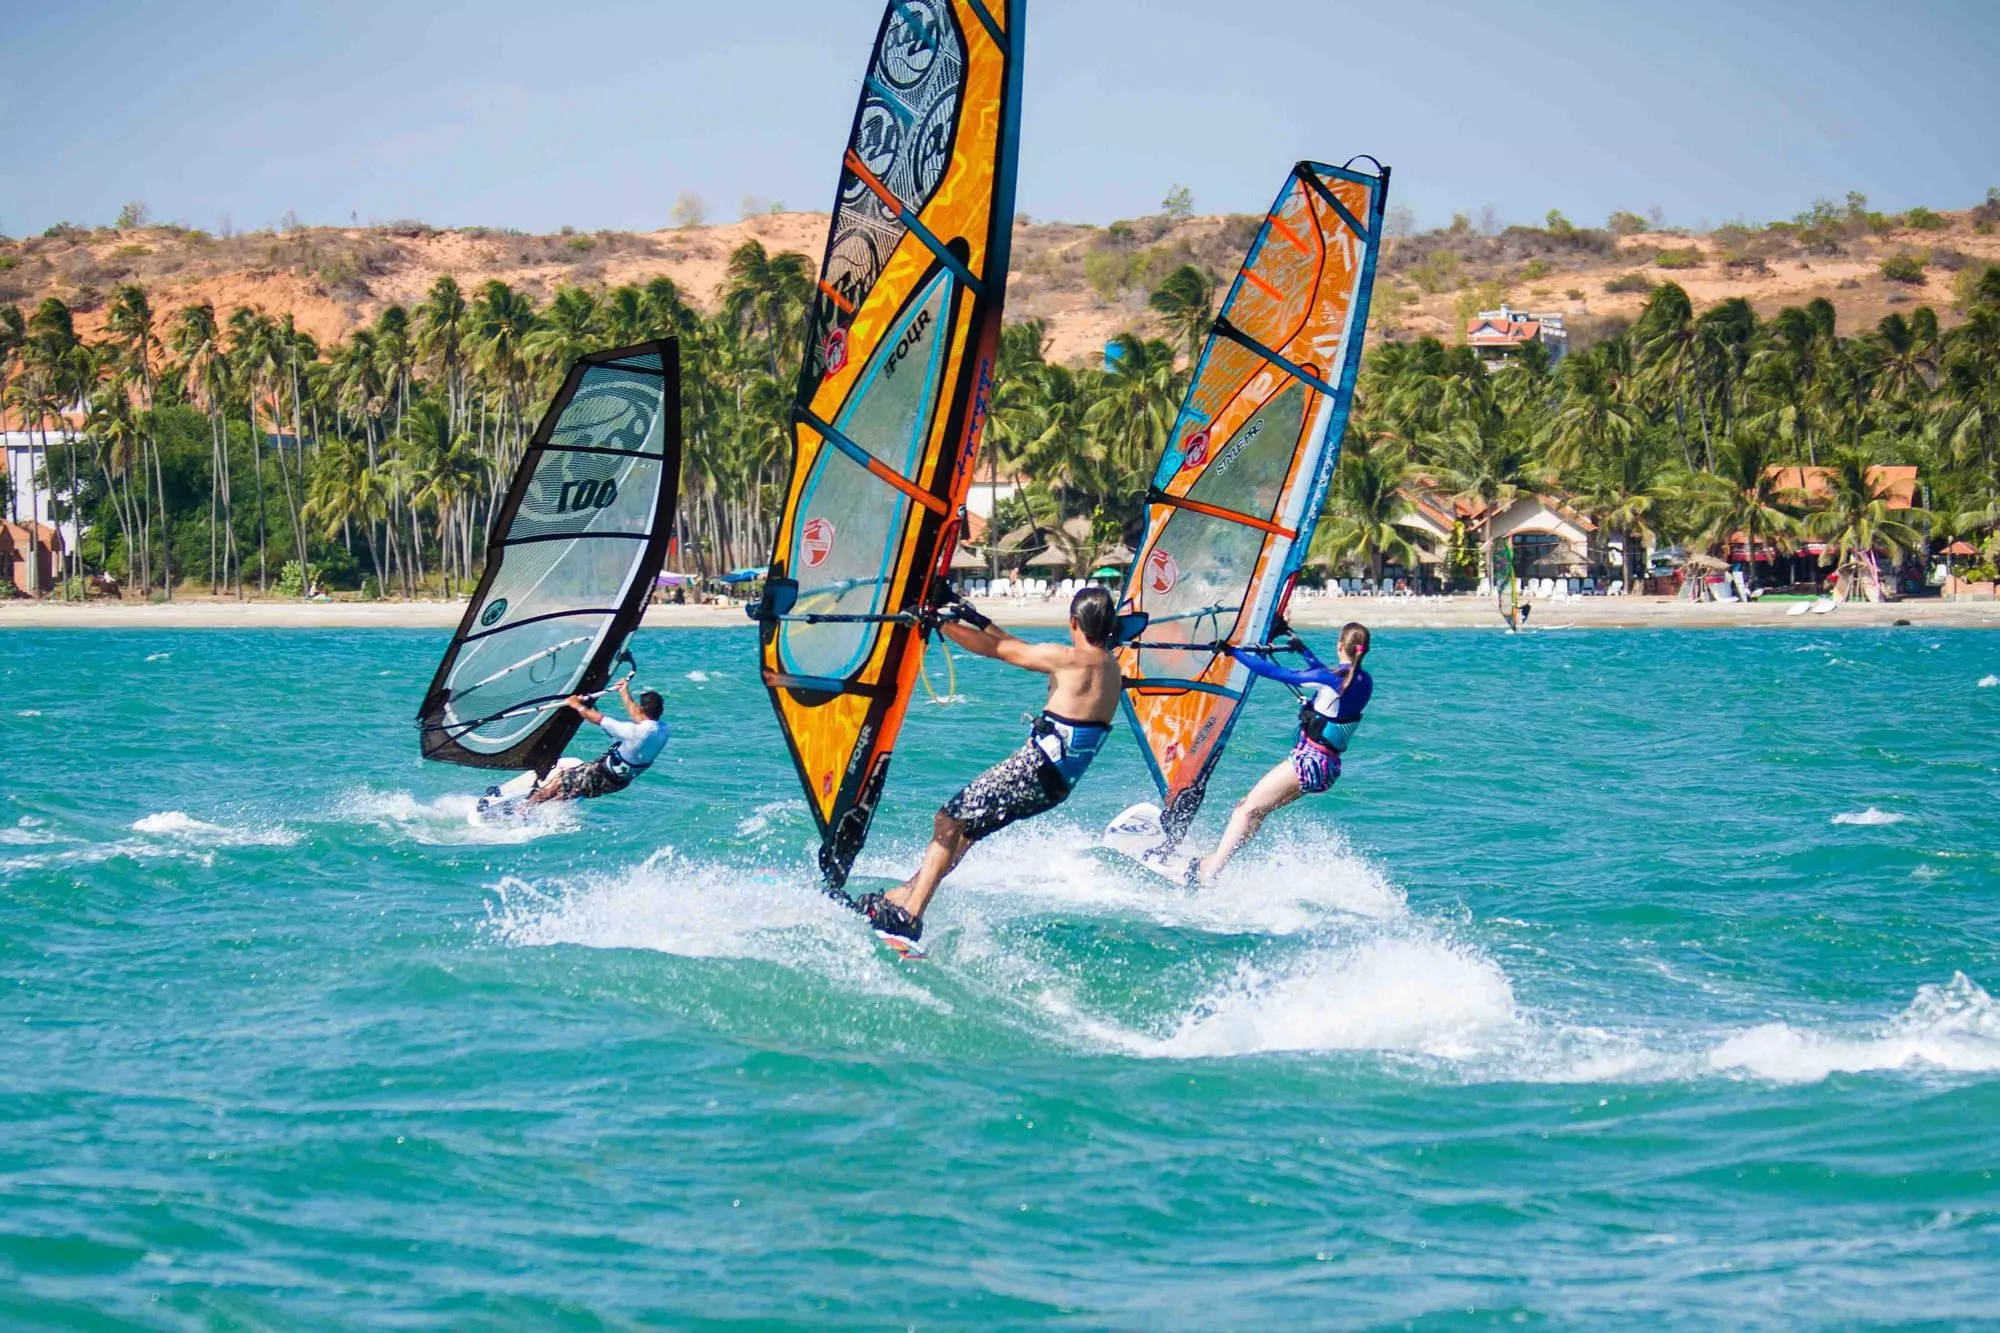 Napra Club in Argentina, South America | Windsurfing - Rated 2.1